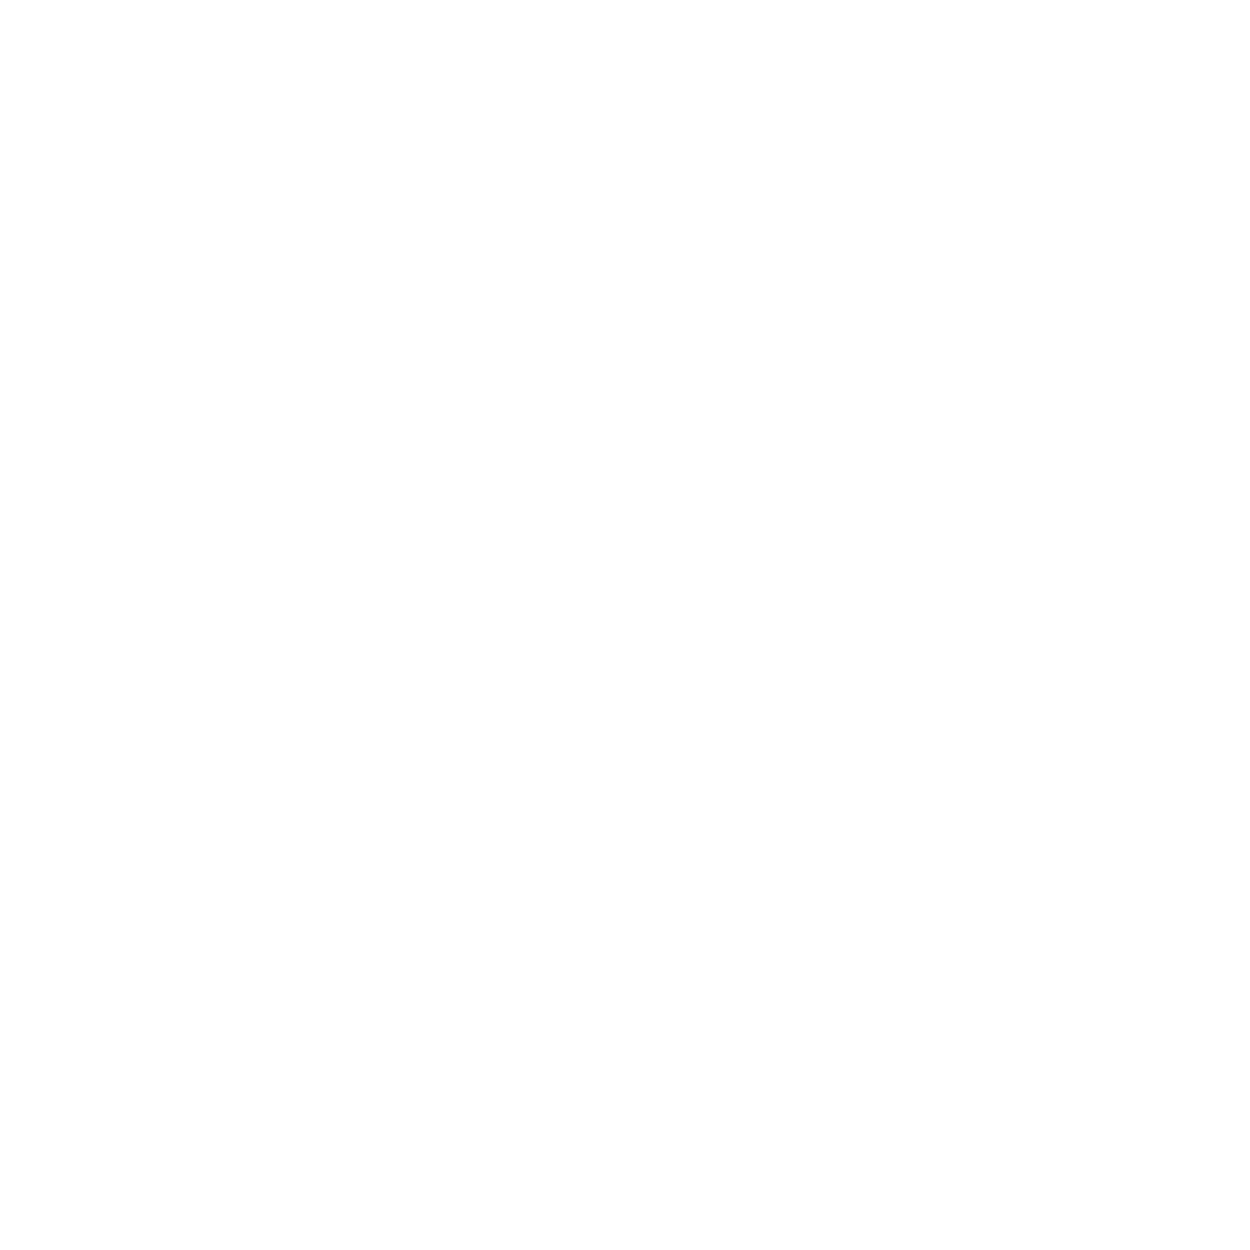 Image of a magnifying glass